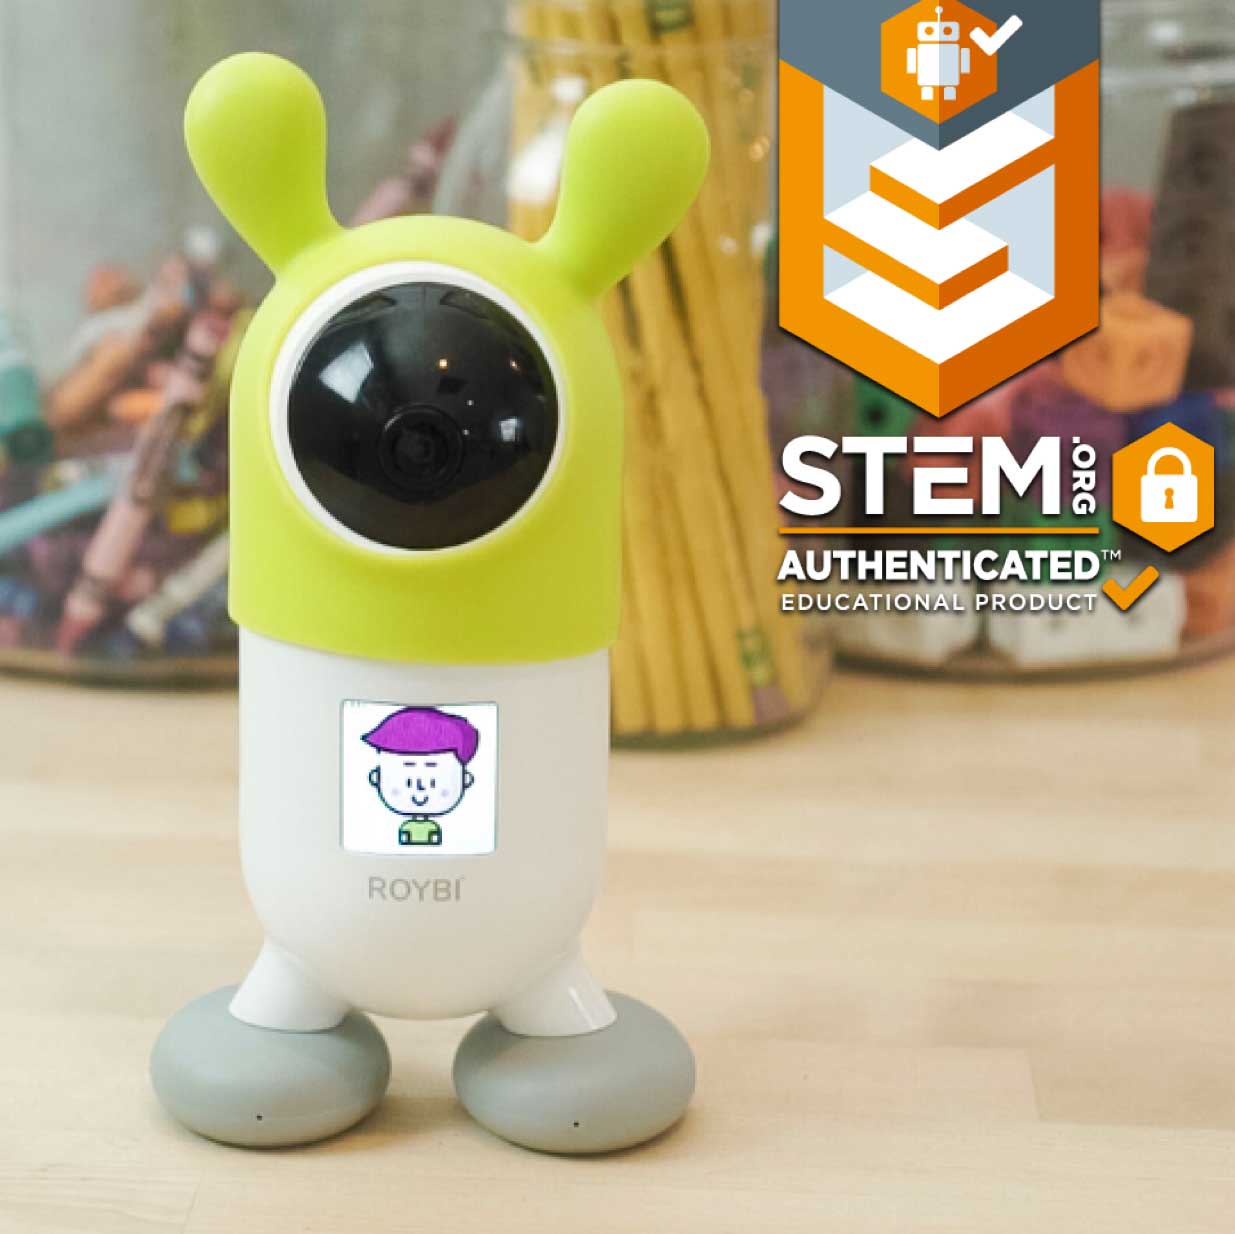 This AI robot for children plays and teaches